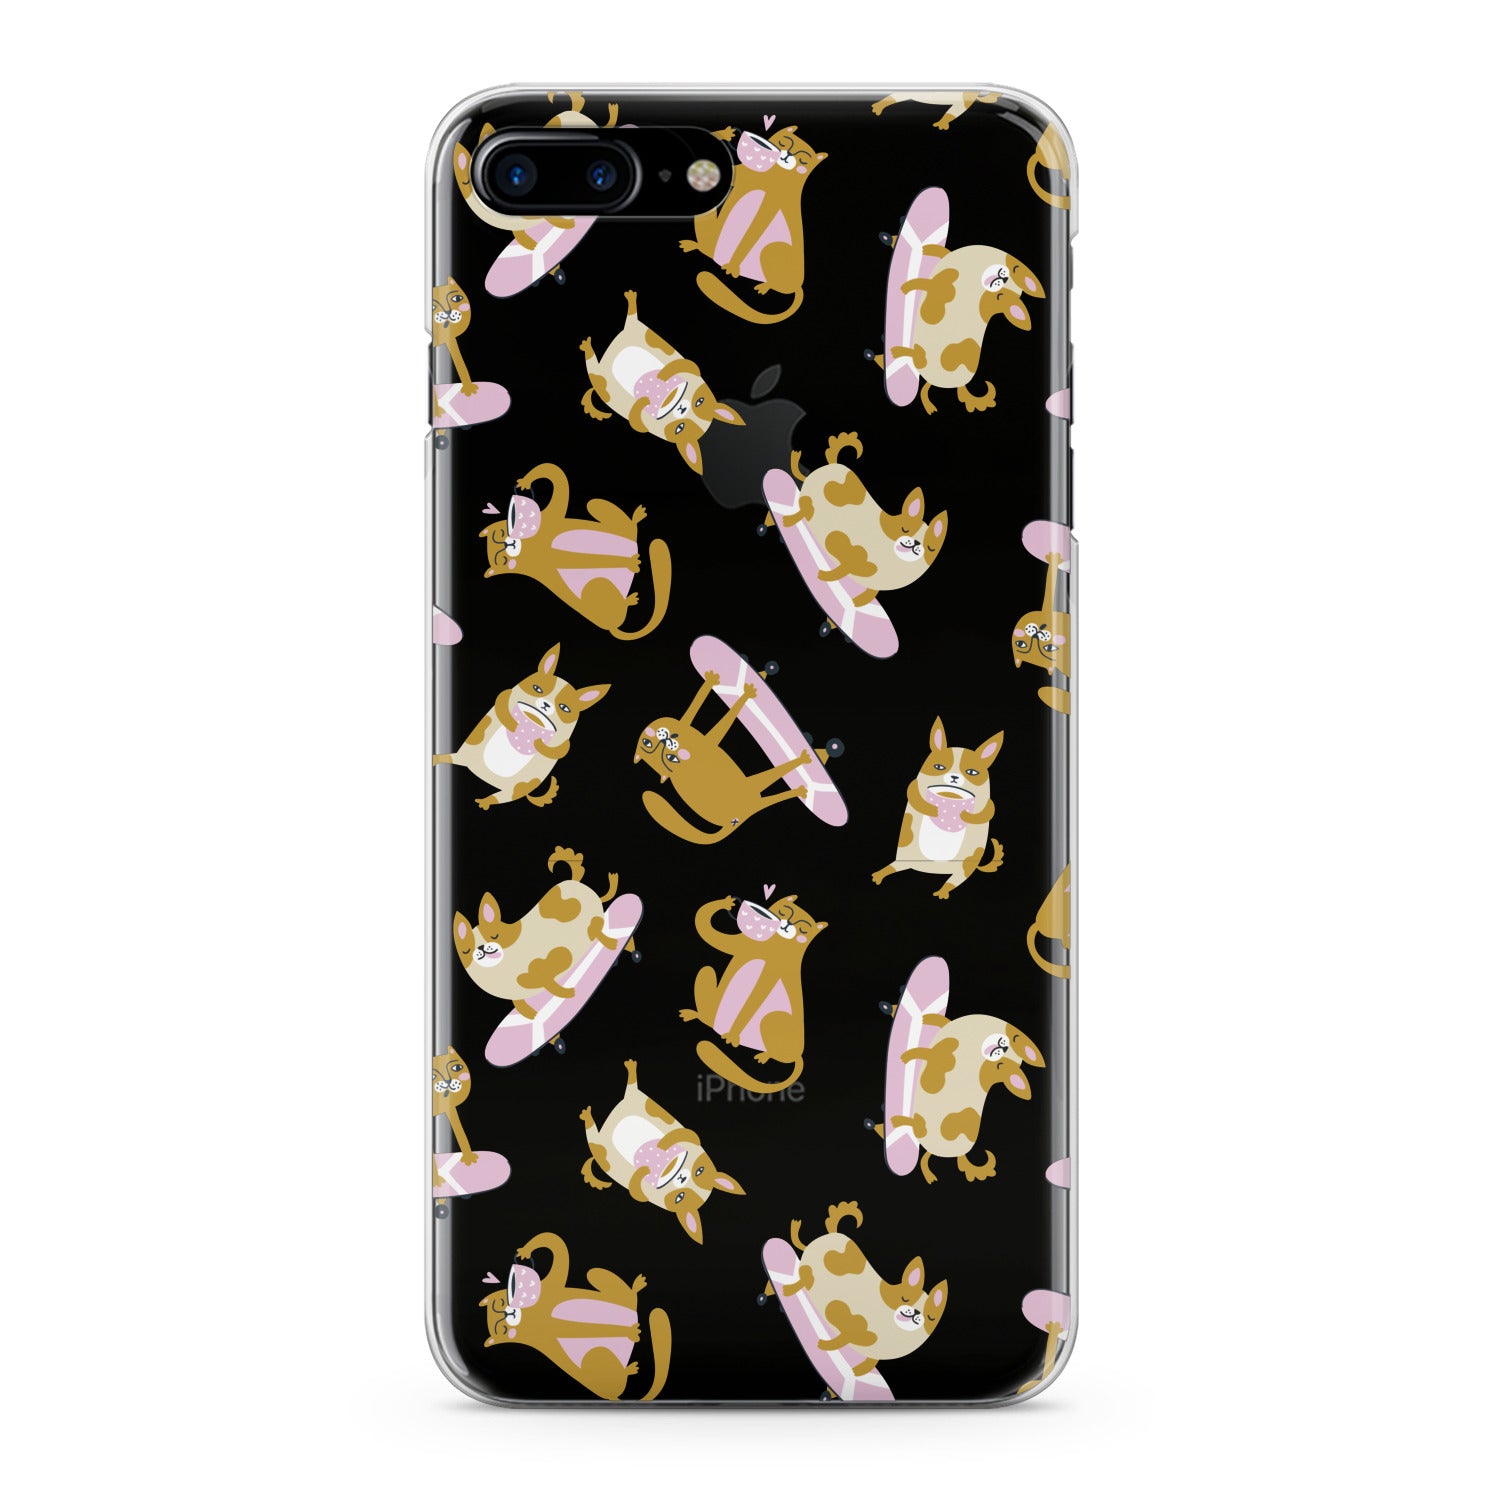 Lex Altern Cat Dog Pattern Phone Case for your iPhone & Android phone.